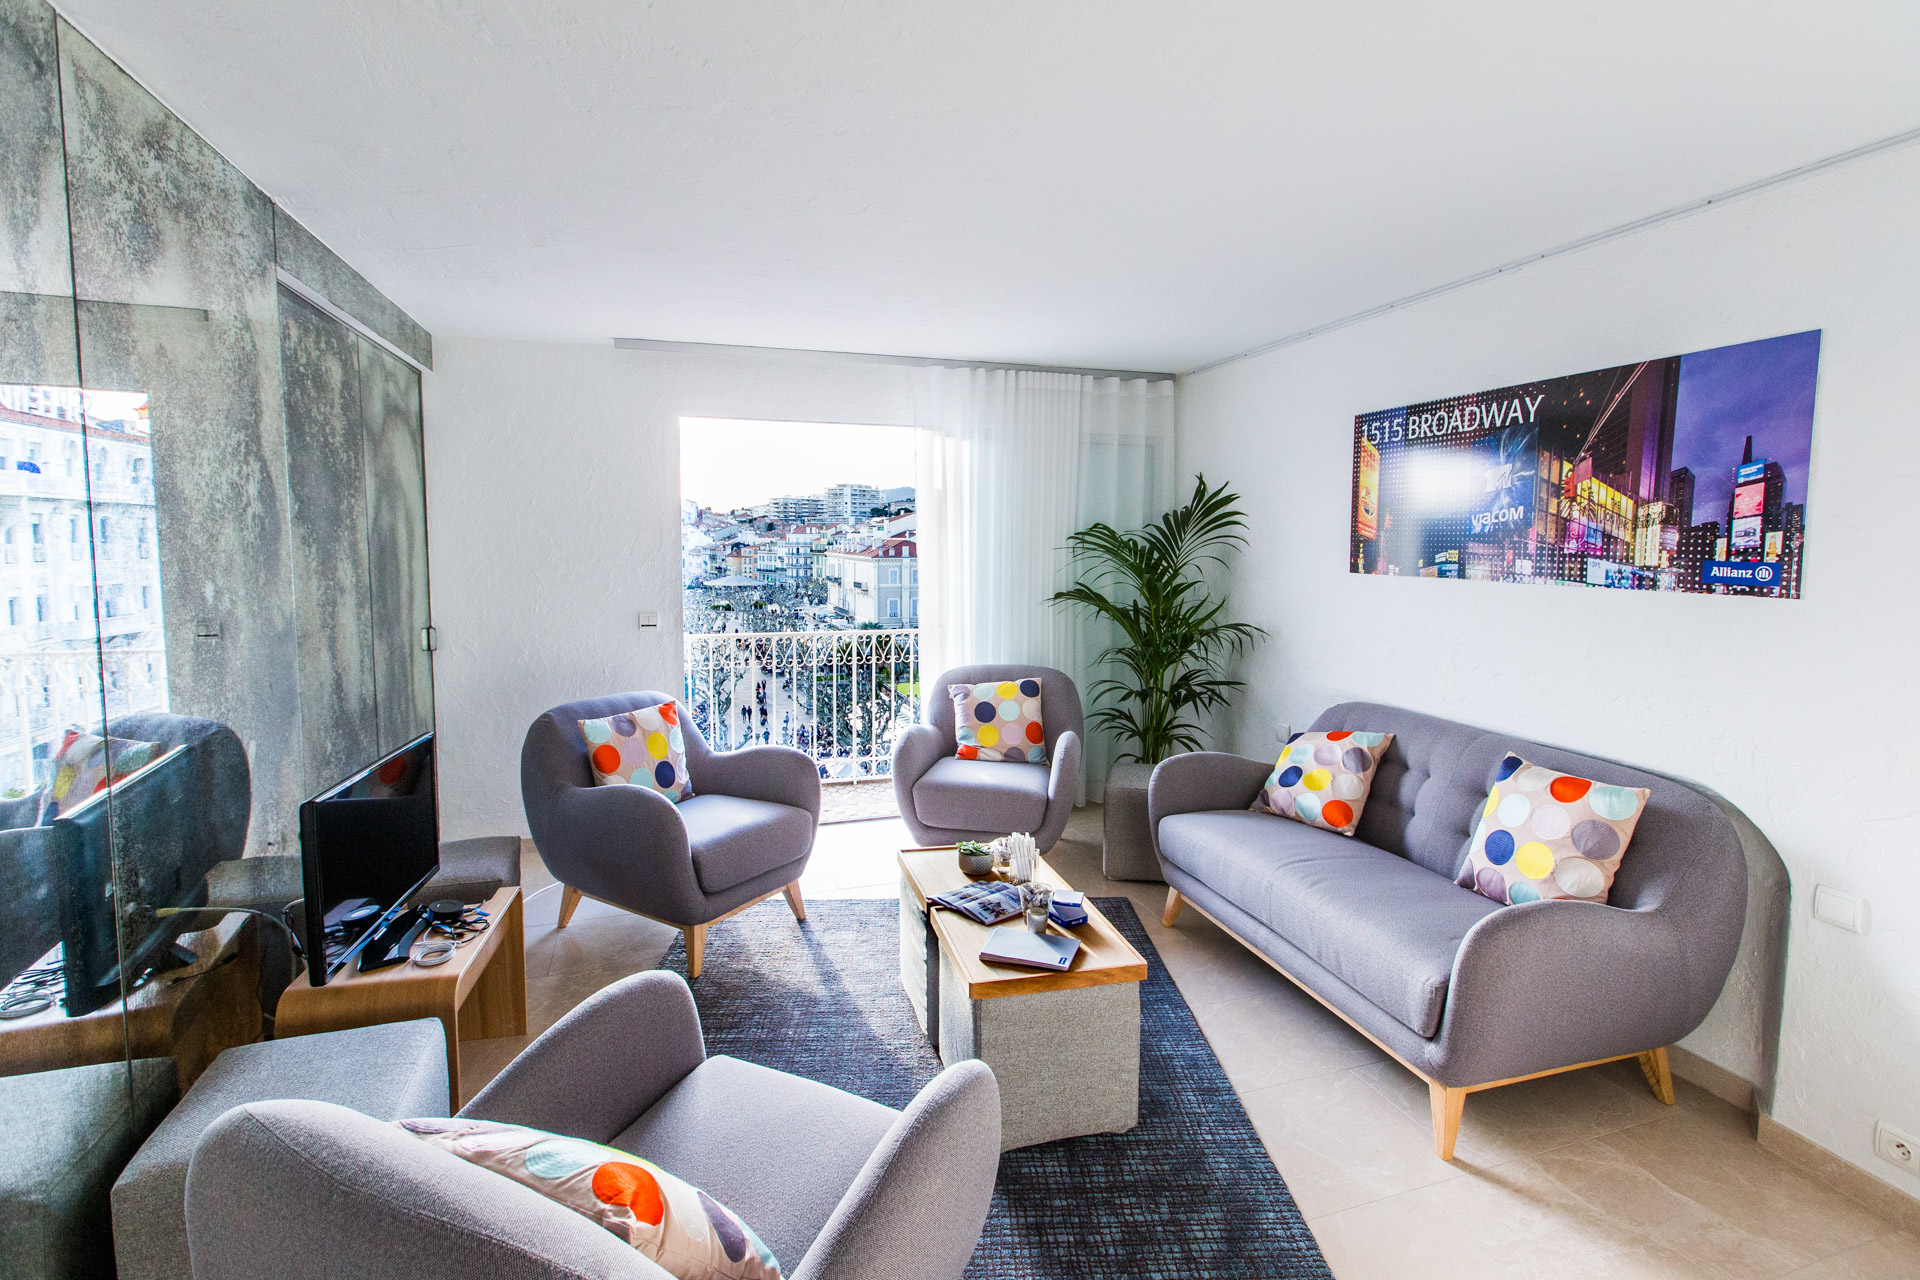 Sofas and chairs in a lounge format for meetings during MIPIM inside headquarters on the croisette in Cannes